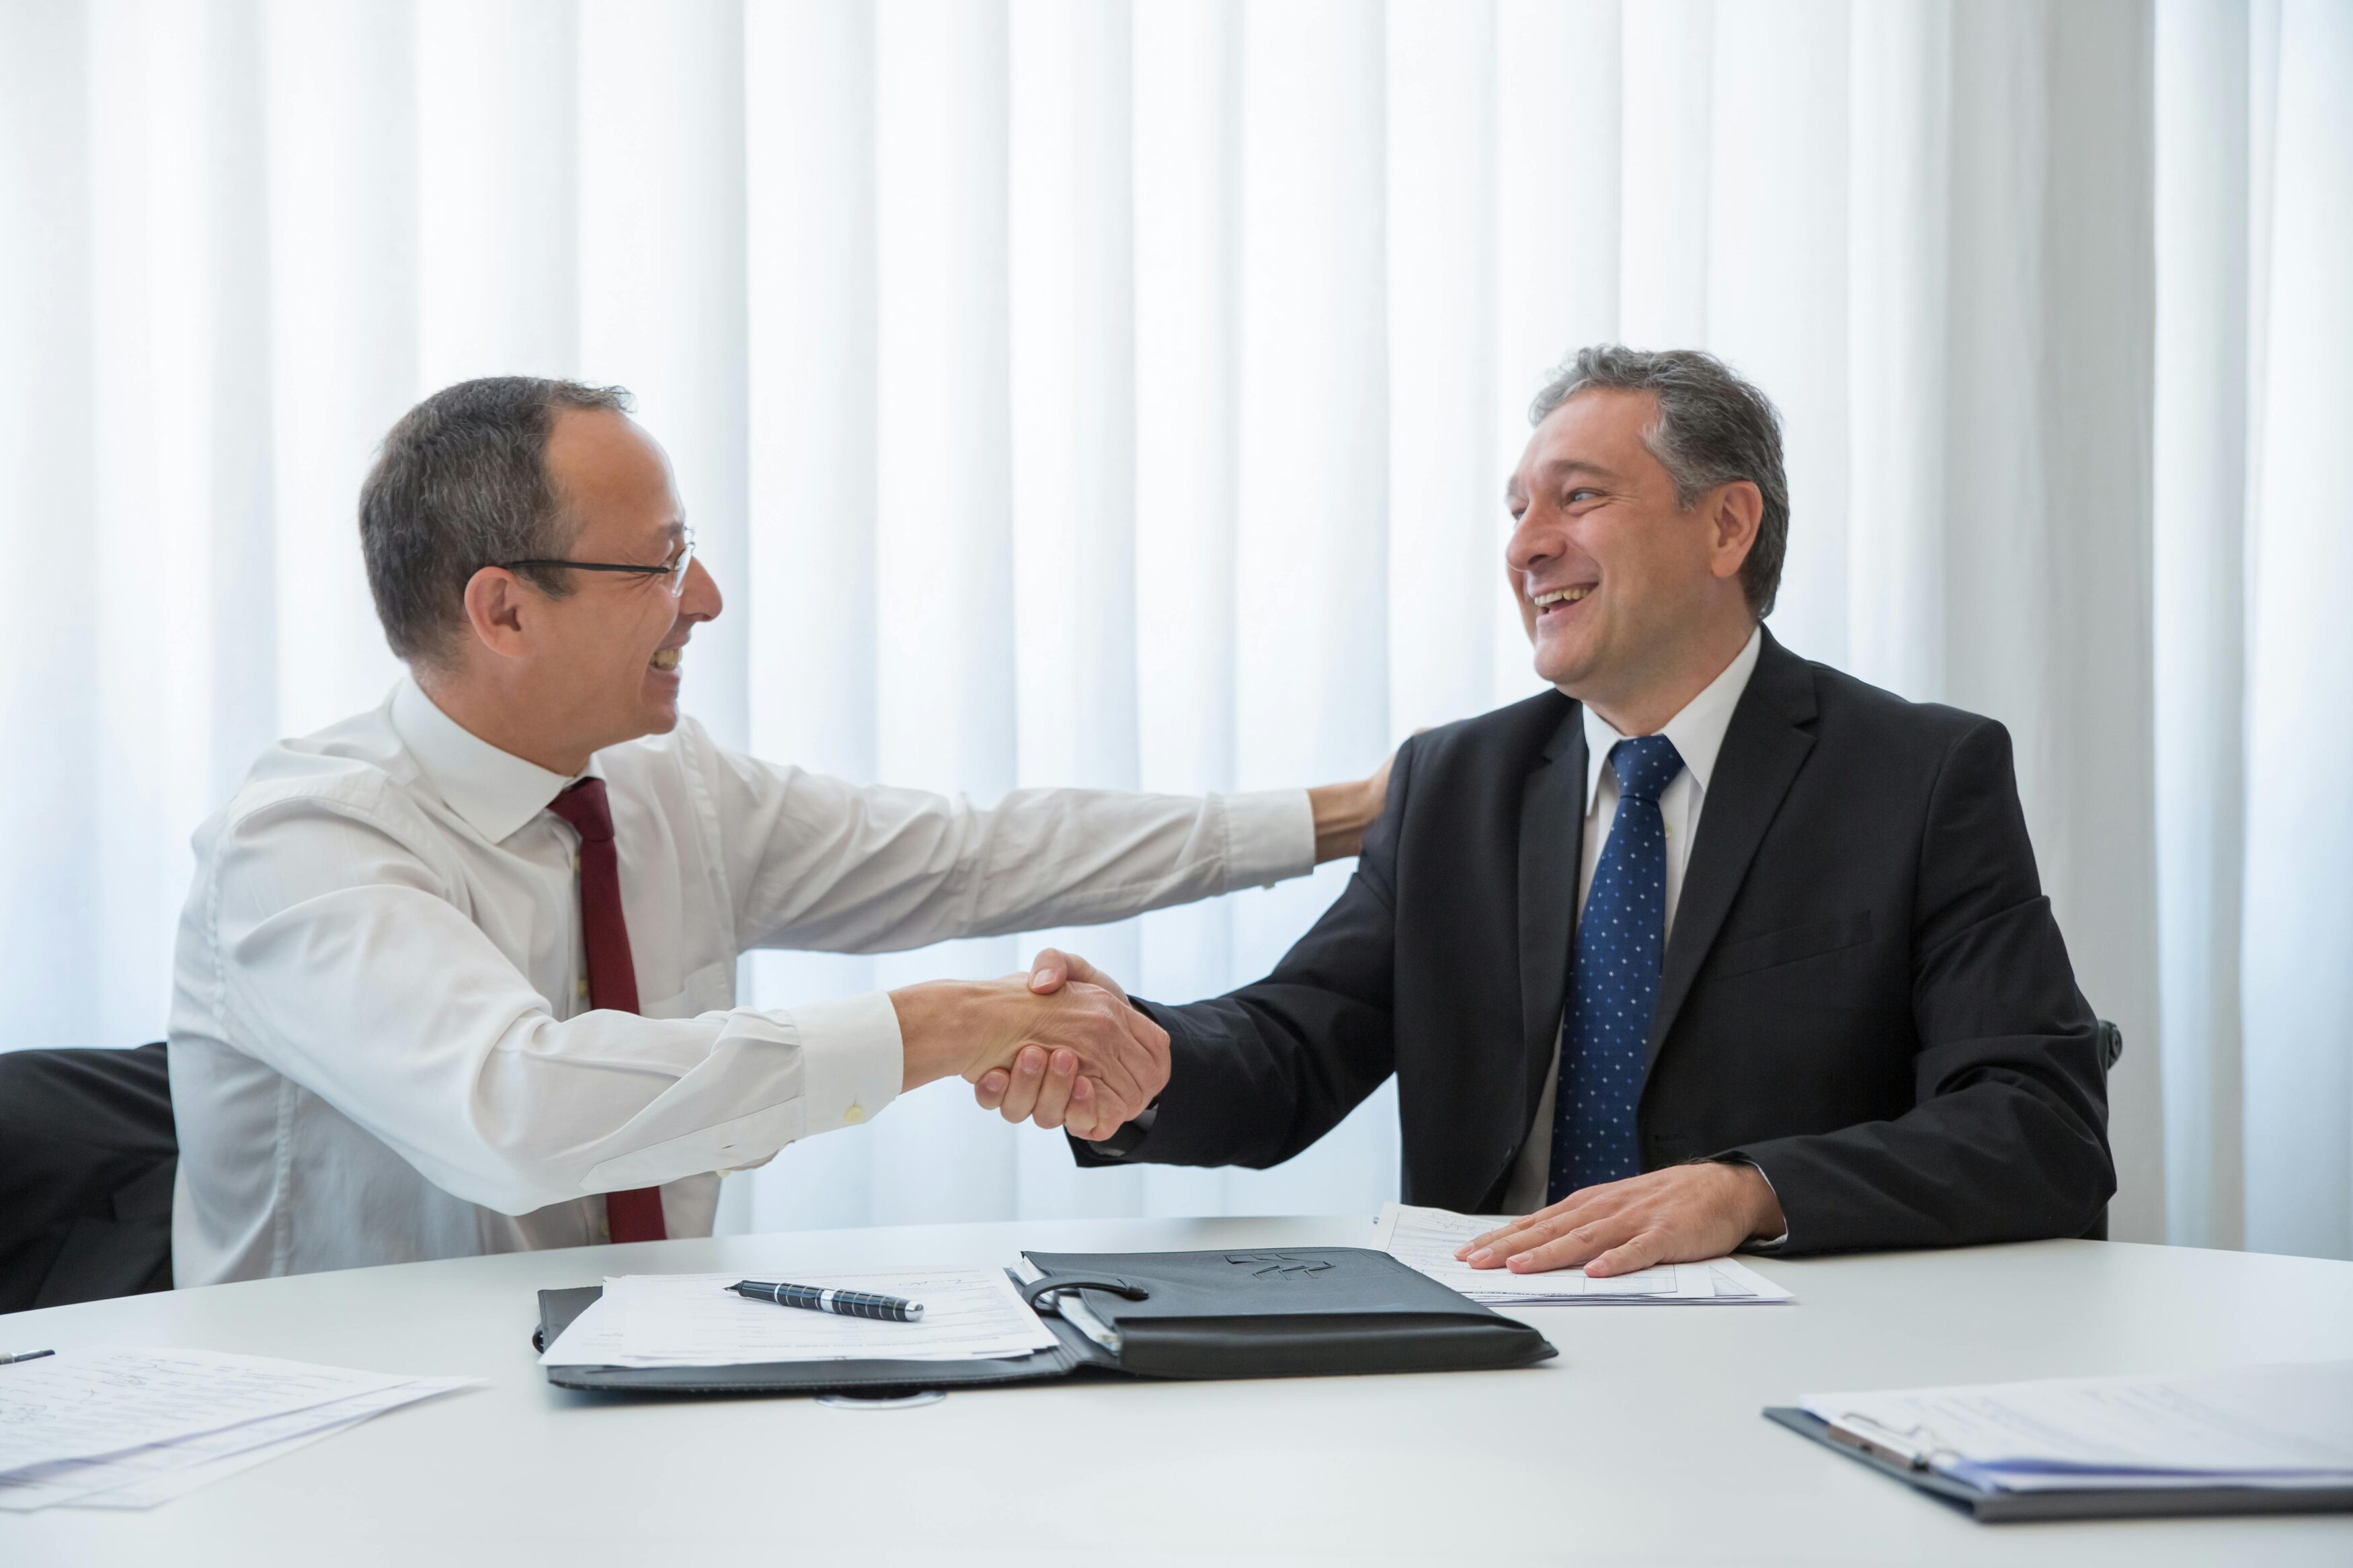 two businessmen shaking hands and smiling in office